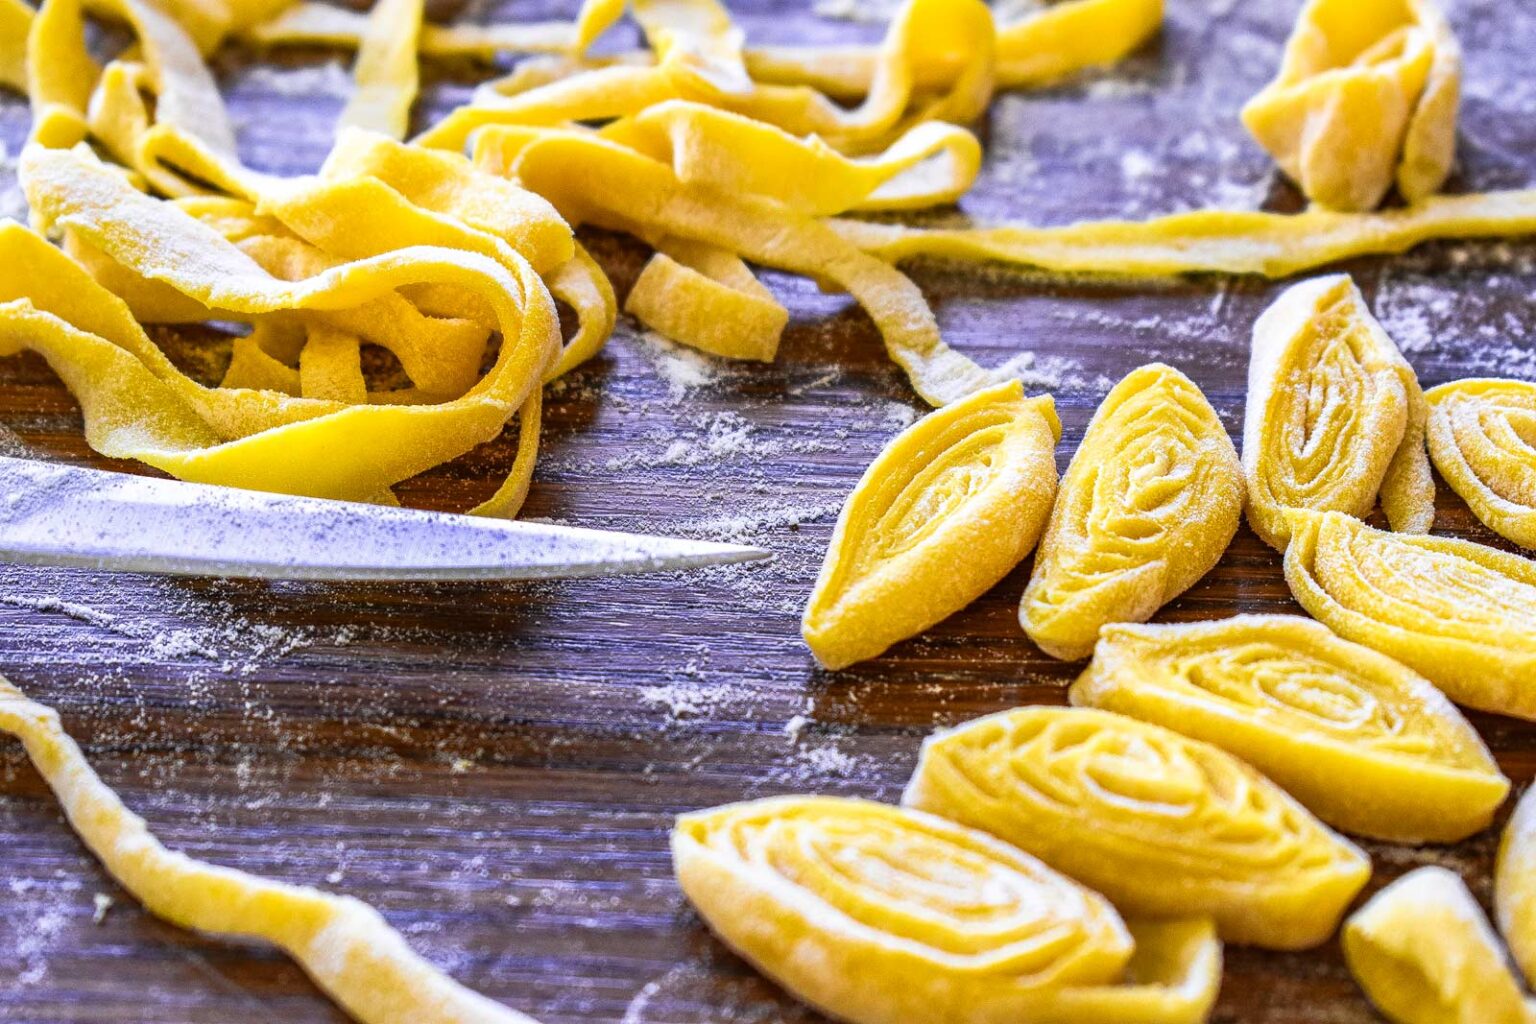 Learn how to make spaghetti without a machine! - The chef's cult